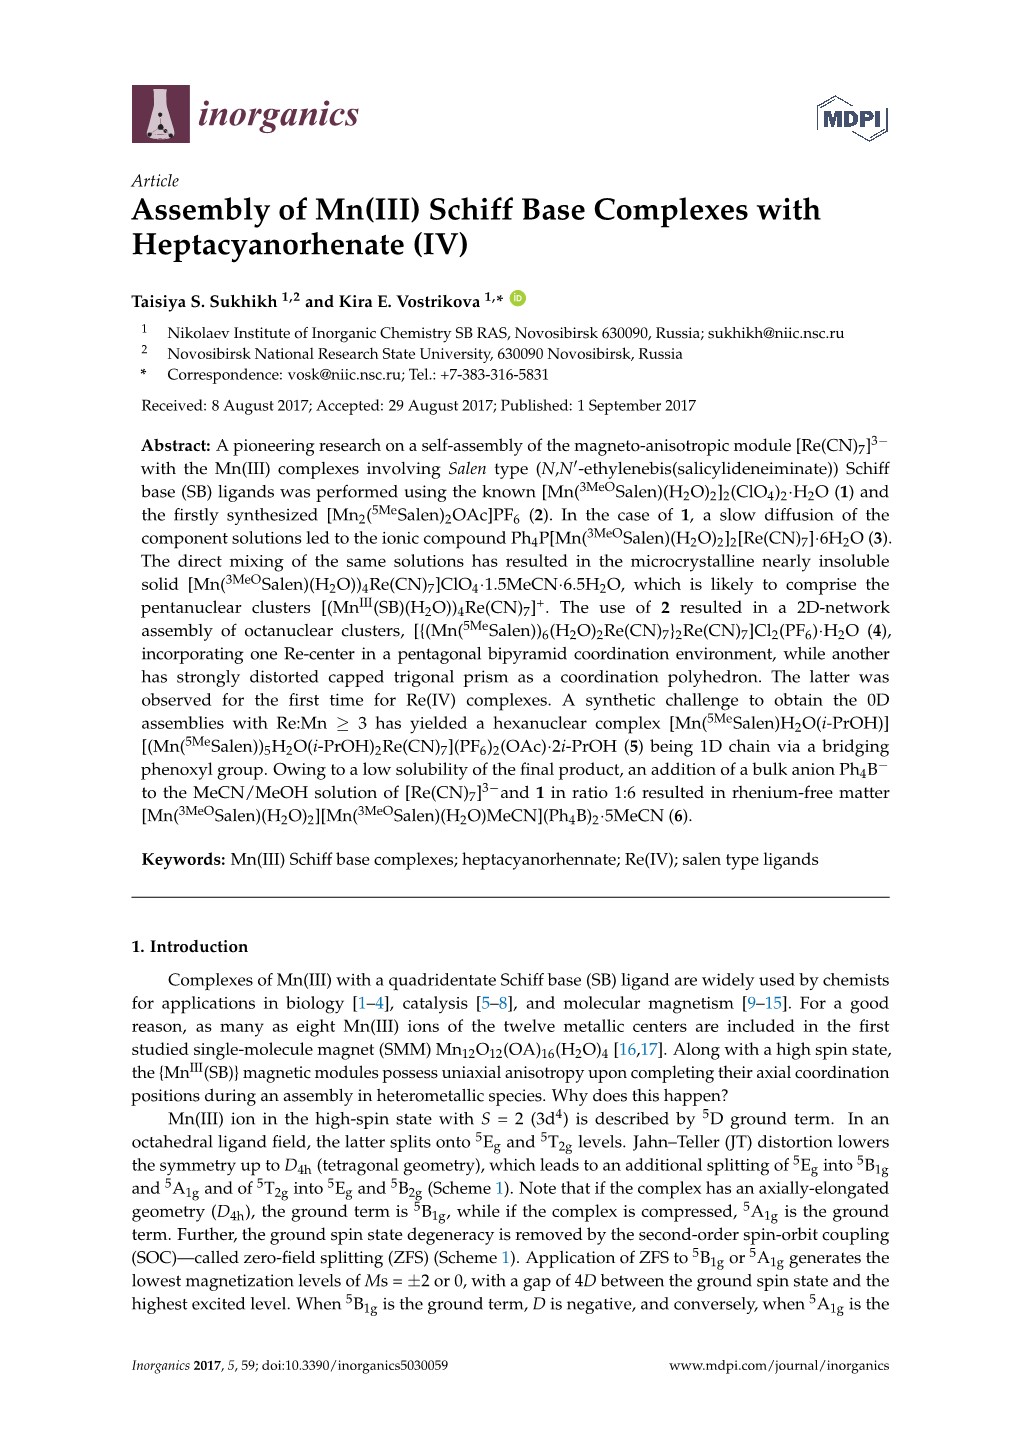 Assembly of Mn(III) Schiff Base Complexes with Heptacyanorhenate (IV)